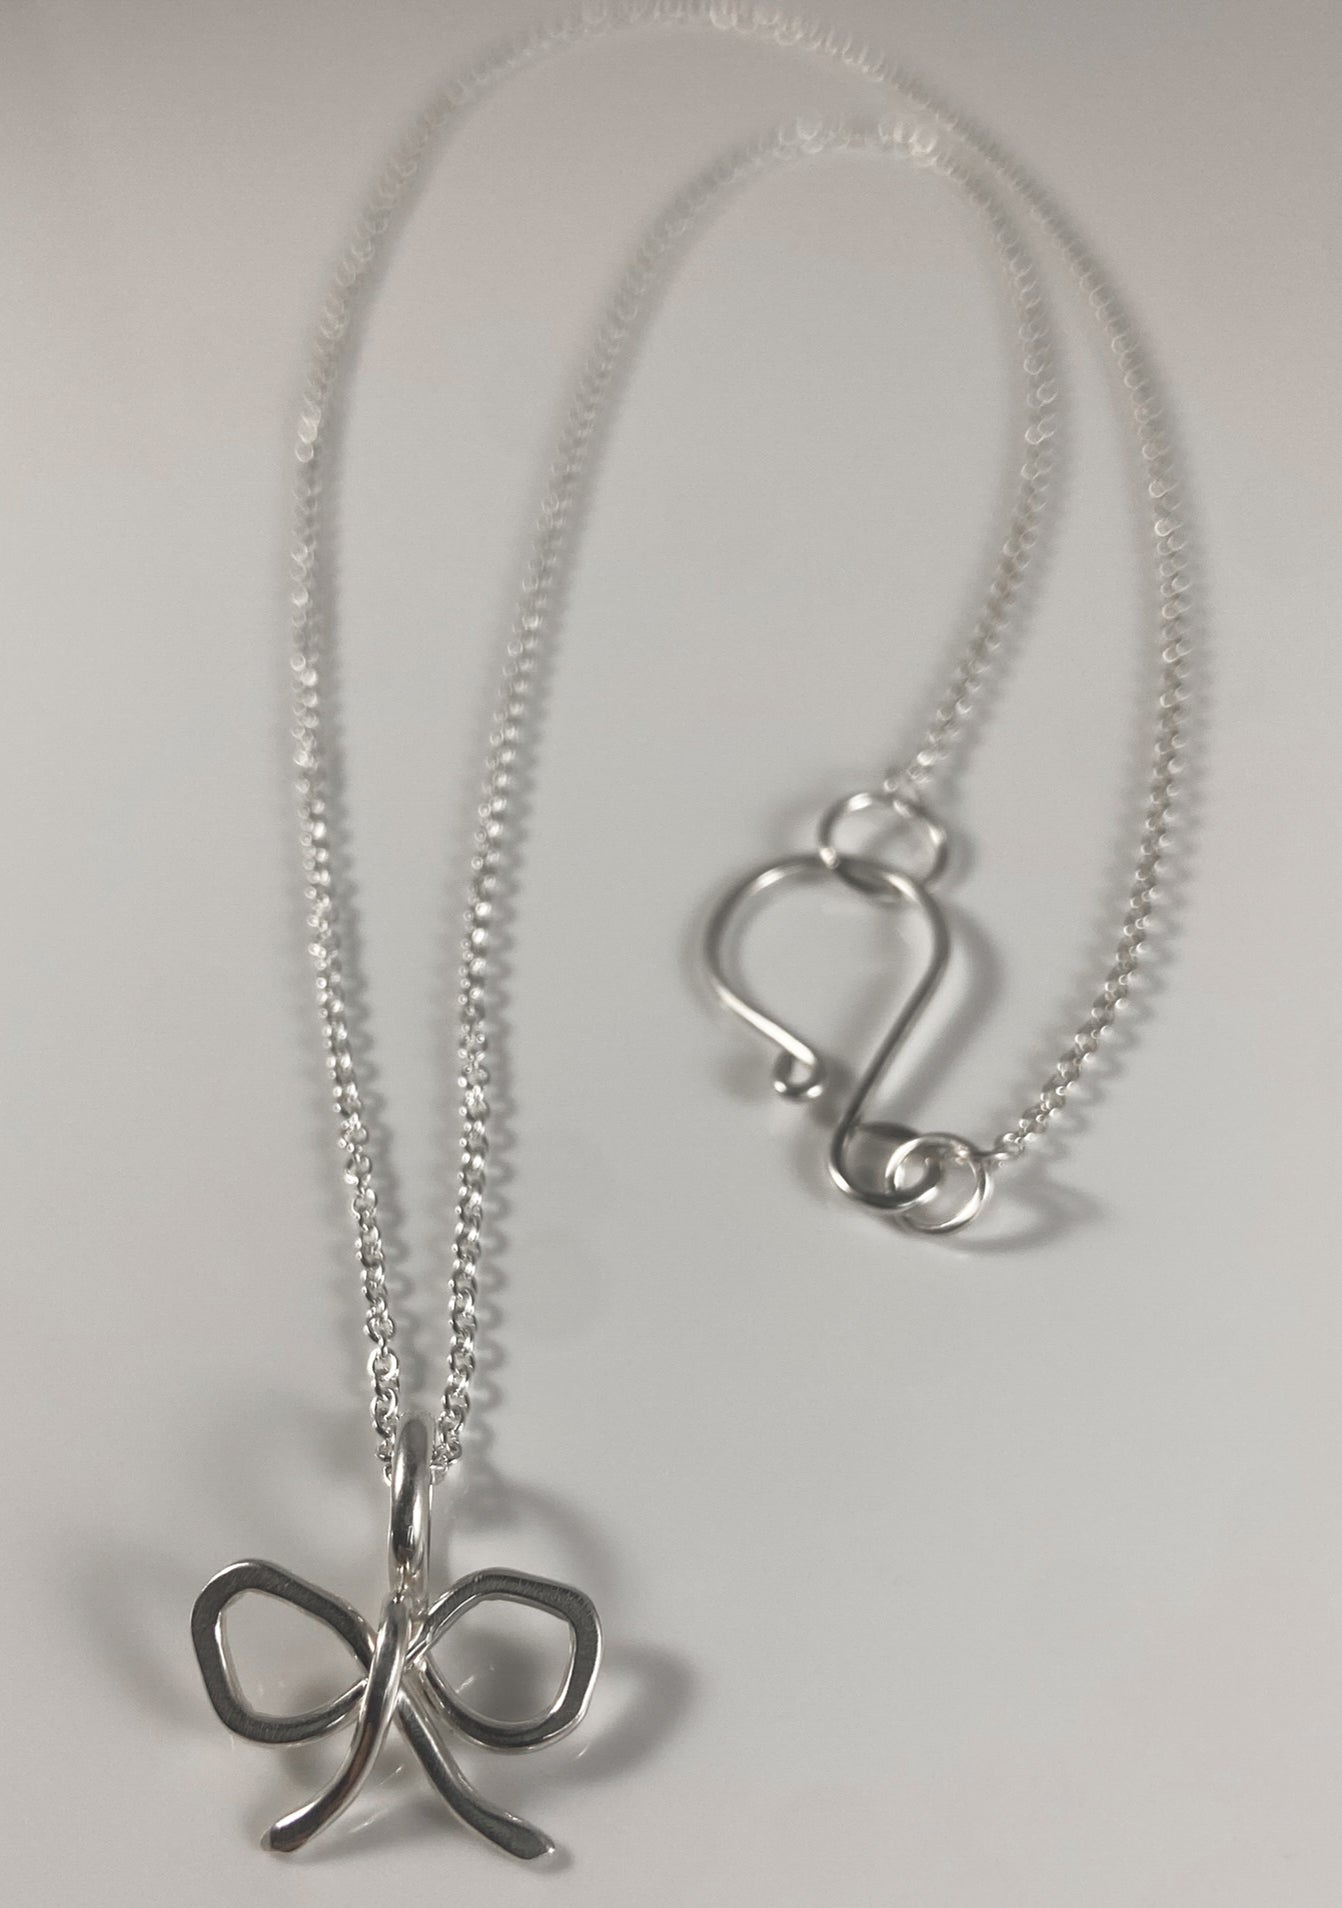 Sterling Silver Bow Necklace